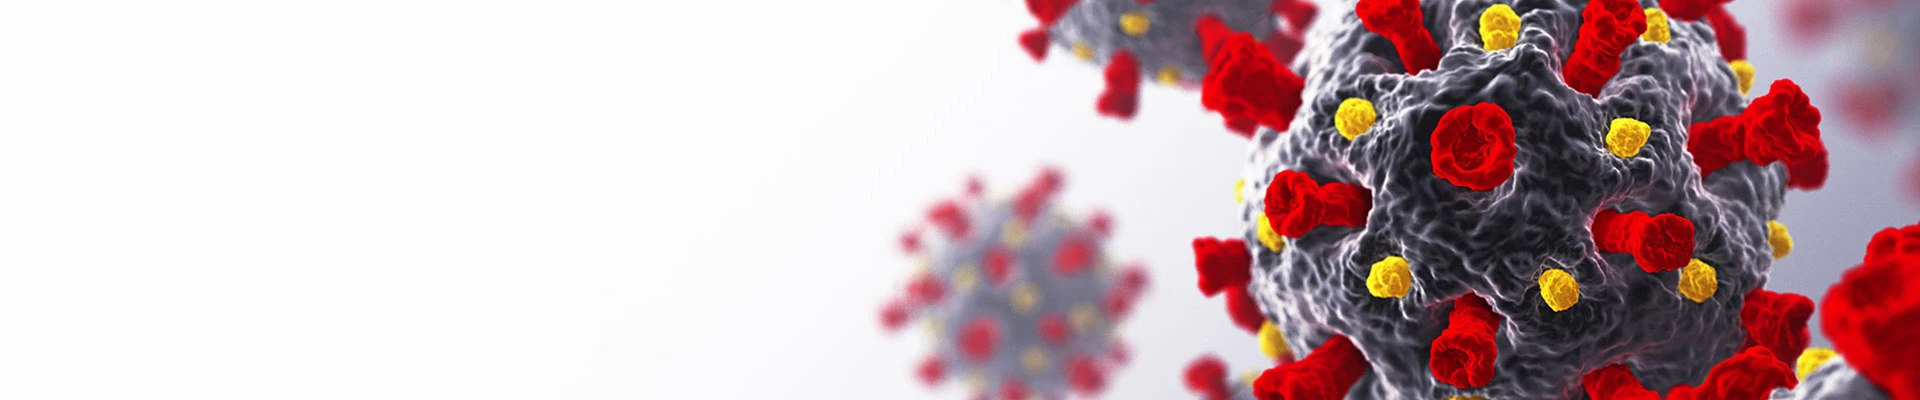 characterize-viral-particles-gene-therapy_1920x400